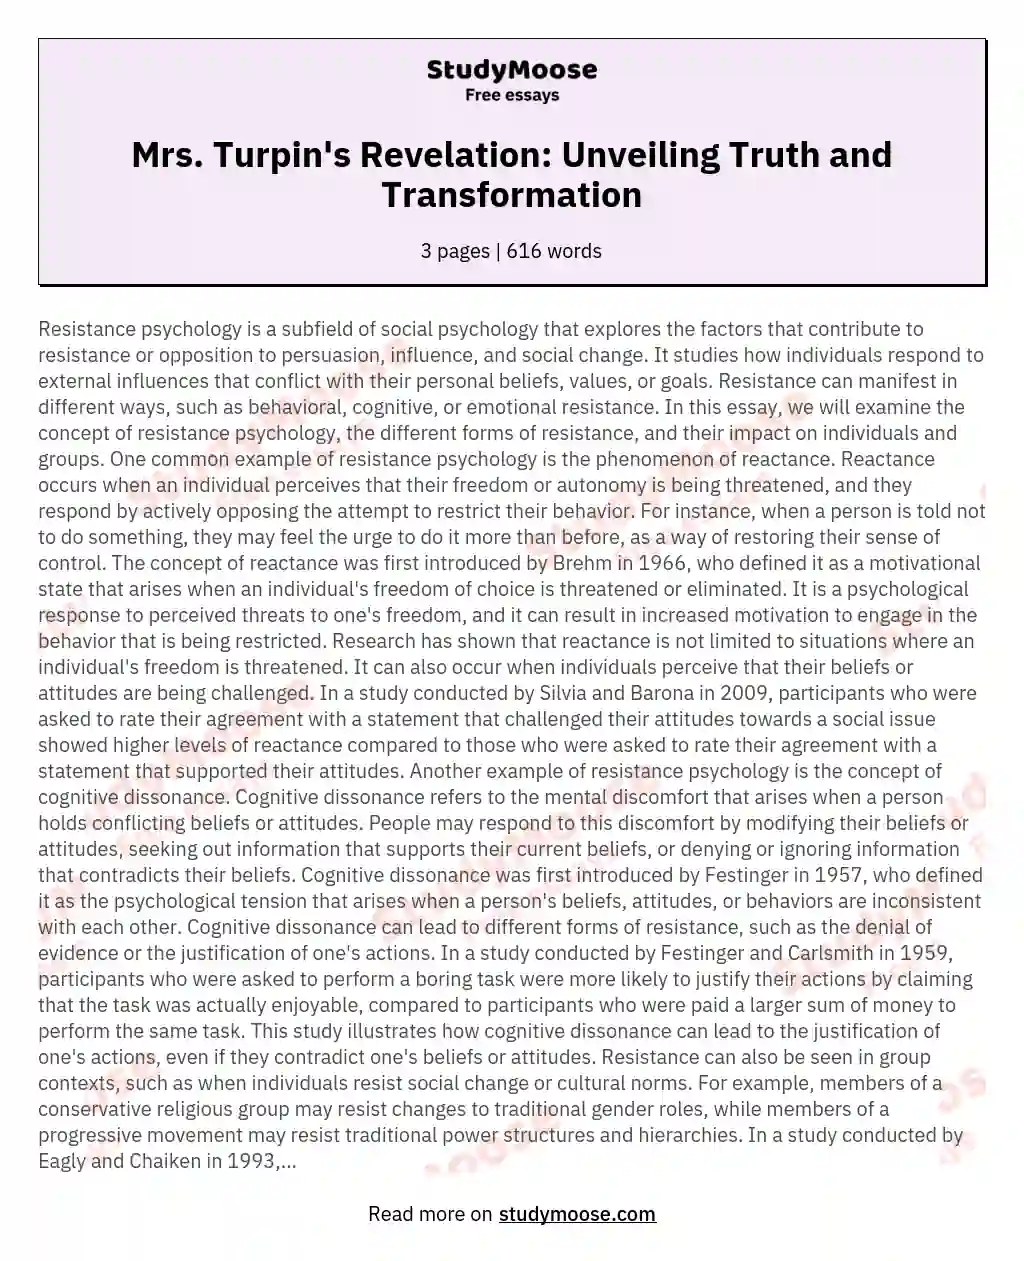 Mrs. Turpin's Revelation: Unveiling Truth and Transformation essay